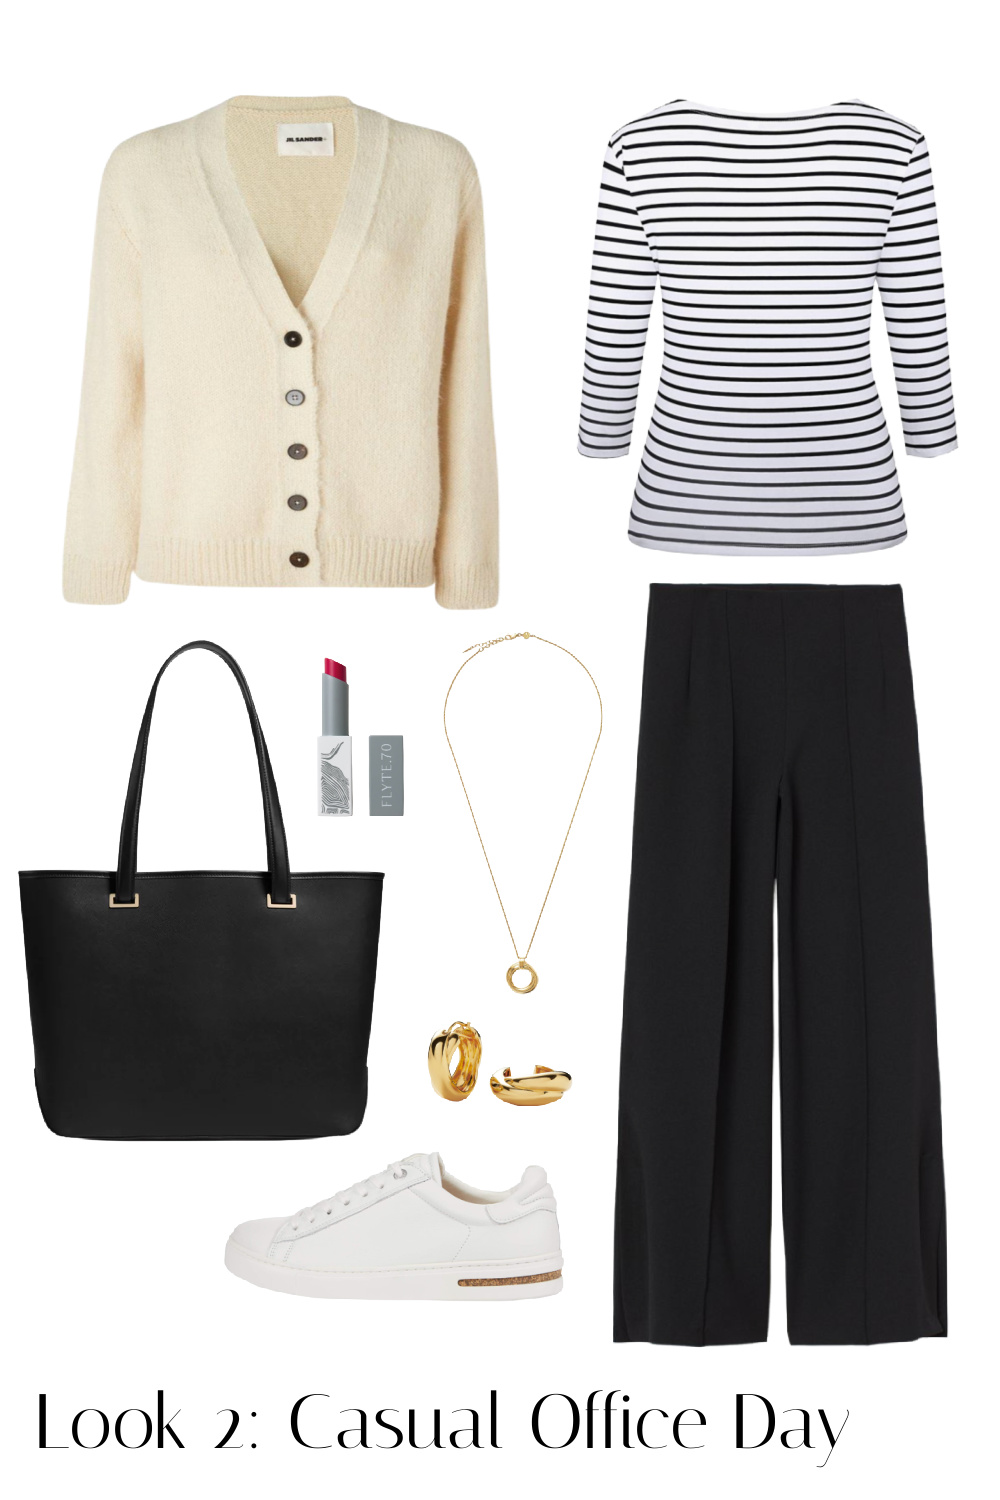 A Cozy Chic Winter Capsule Wardrobe in Both Misses & Plus Sizes ...